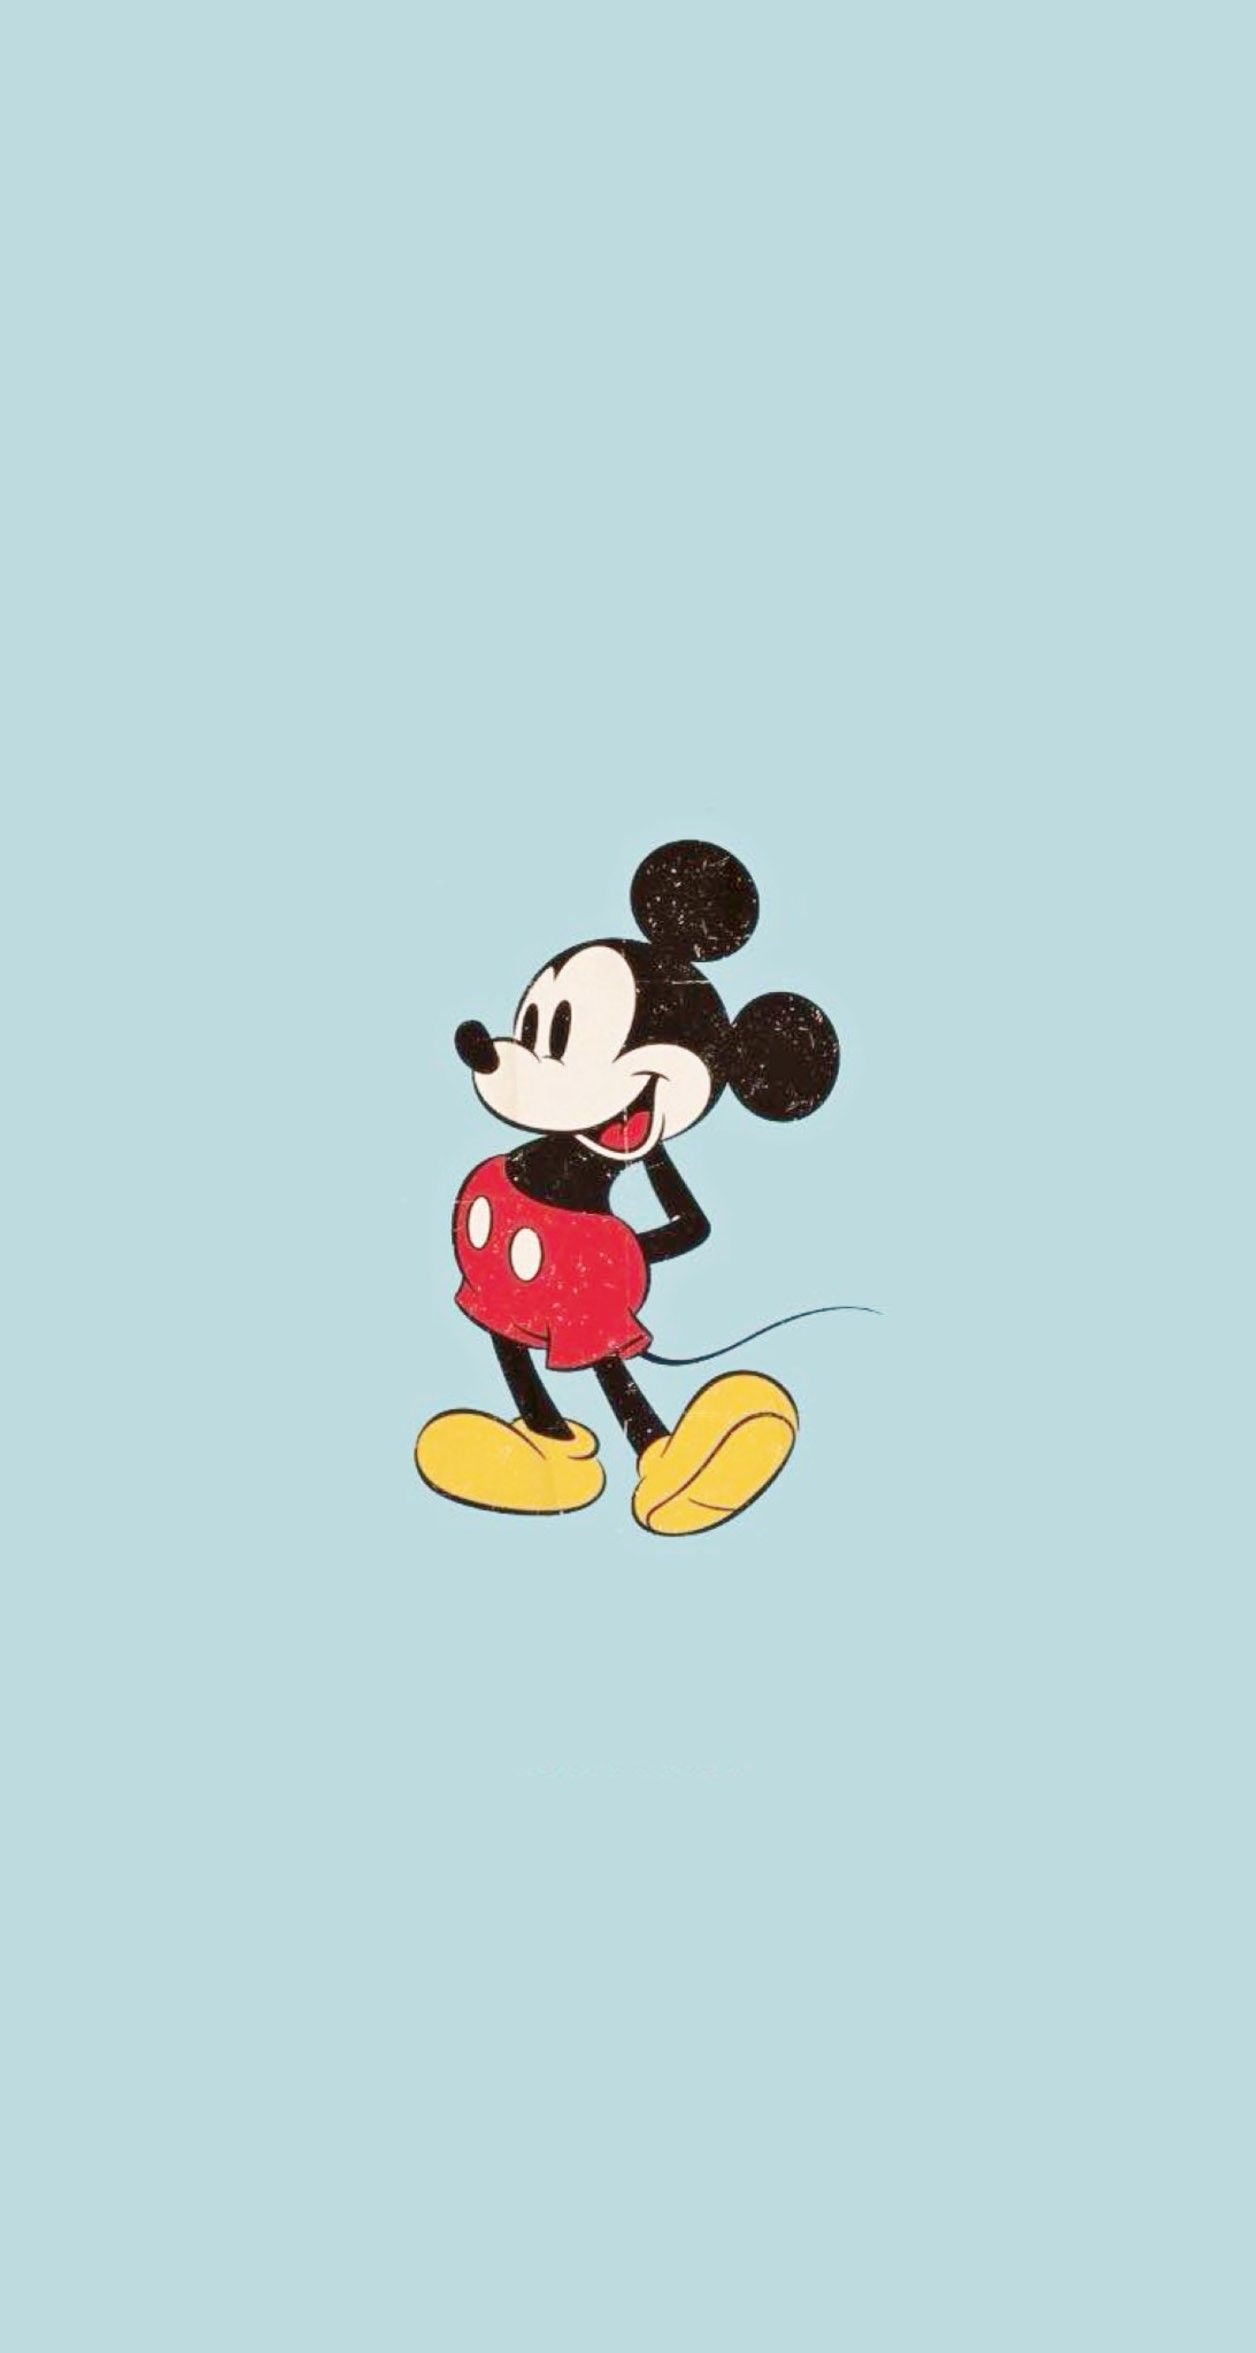 1256x2353 Mickey Mouse Phone Wallpaper | HD Wallpapers | Pinterest ...